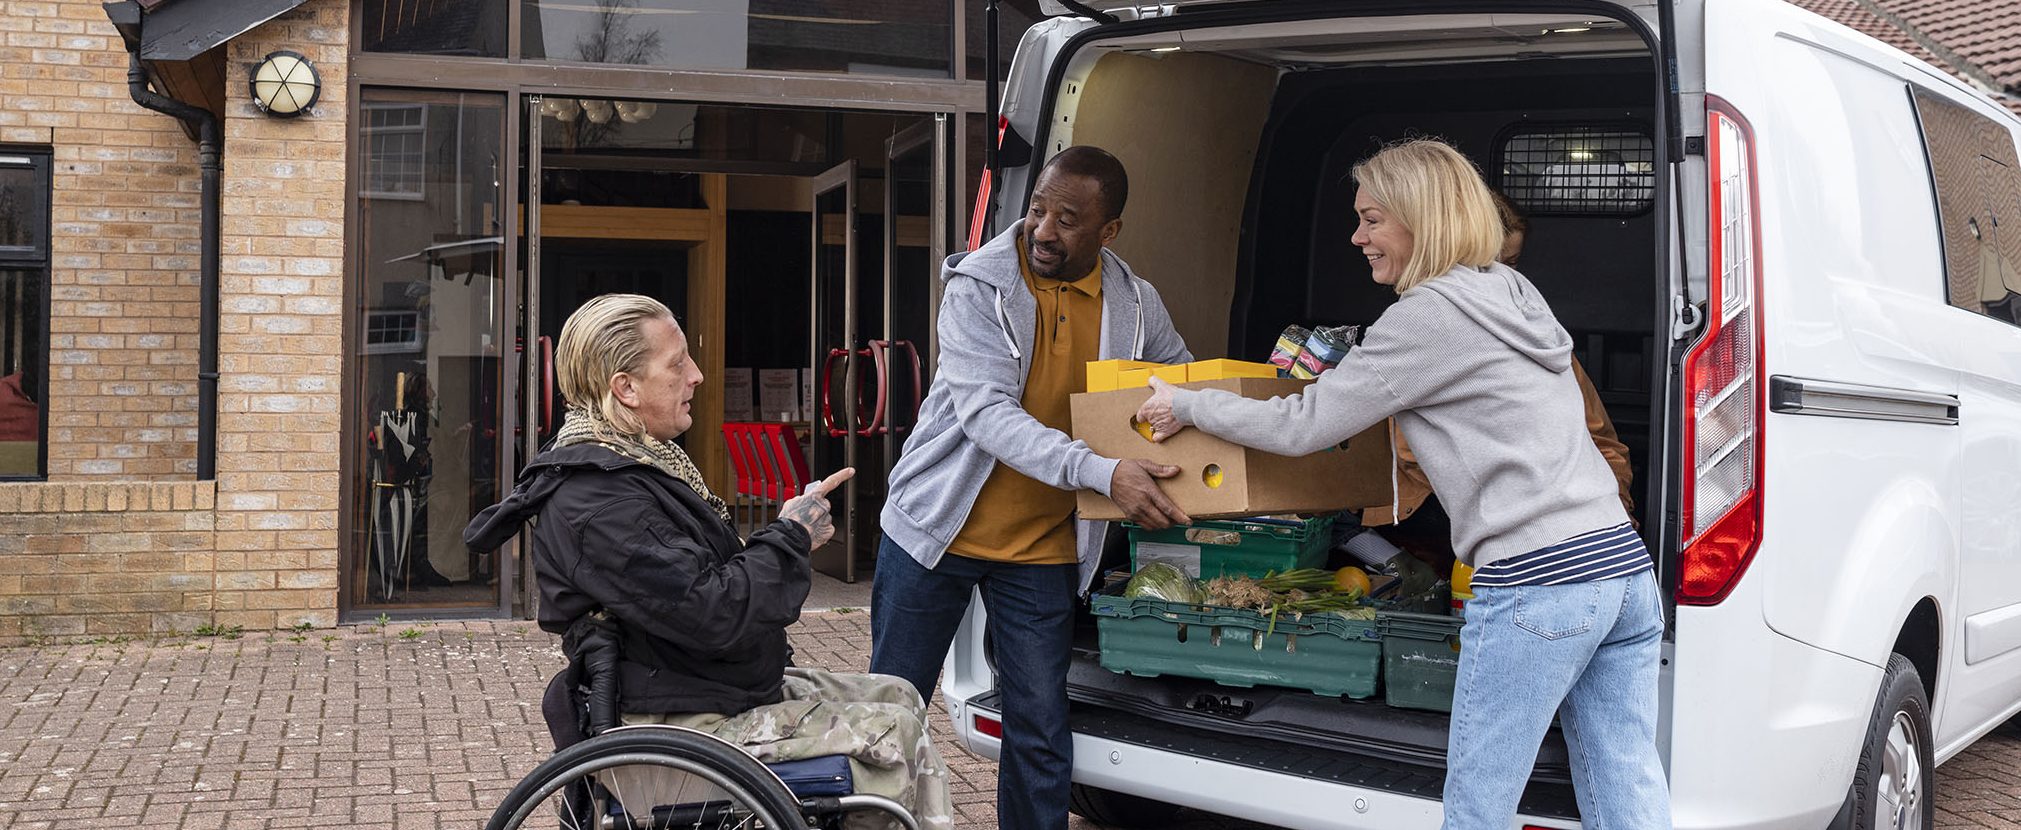 A man and woman load boxes into a van and chat with a man in a wheelchair.